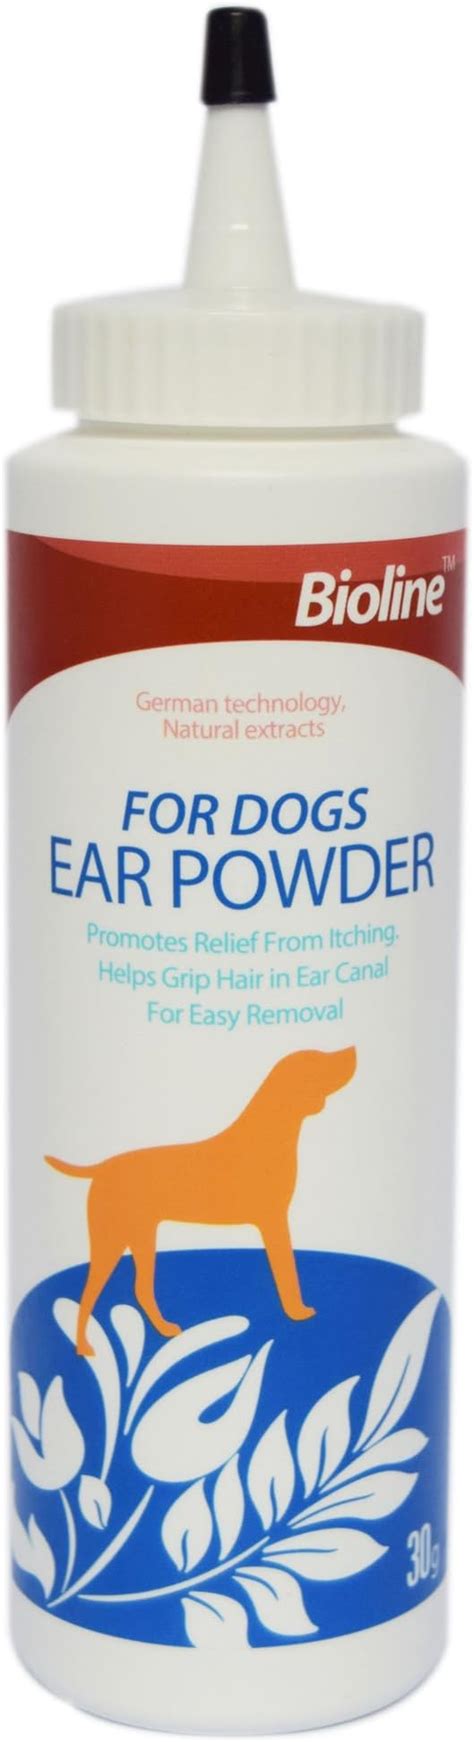 Ear Powder For Dogs Quick Relief For Itchy, Smelly & Waxy Ears - Aids ...